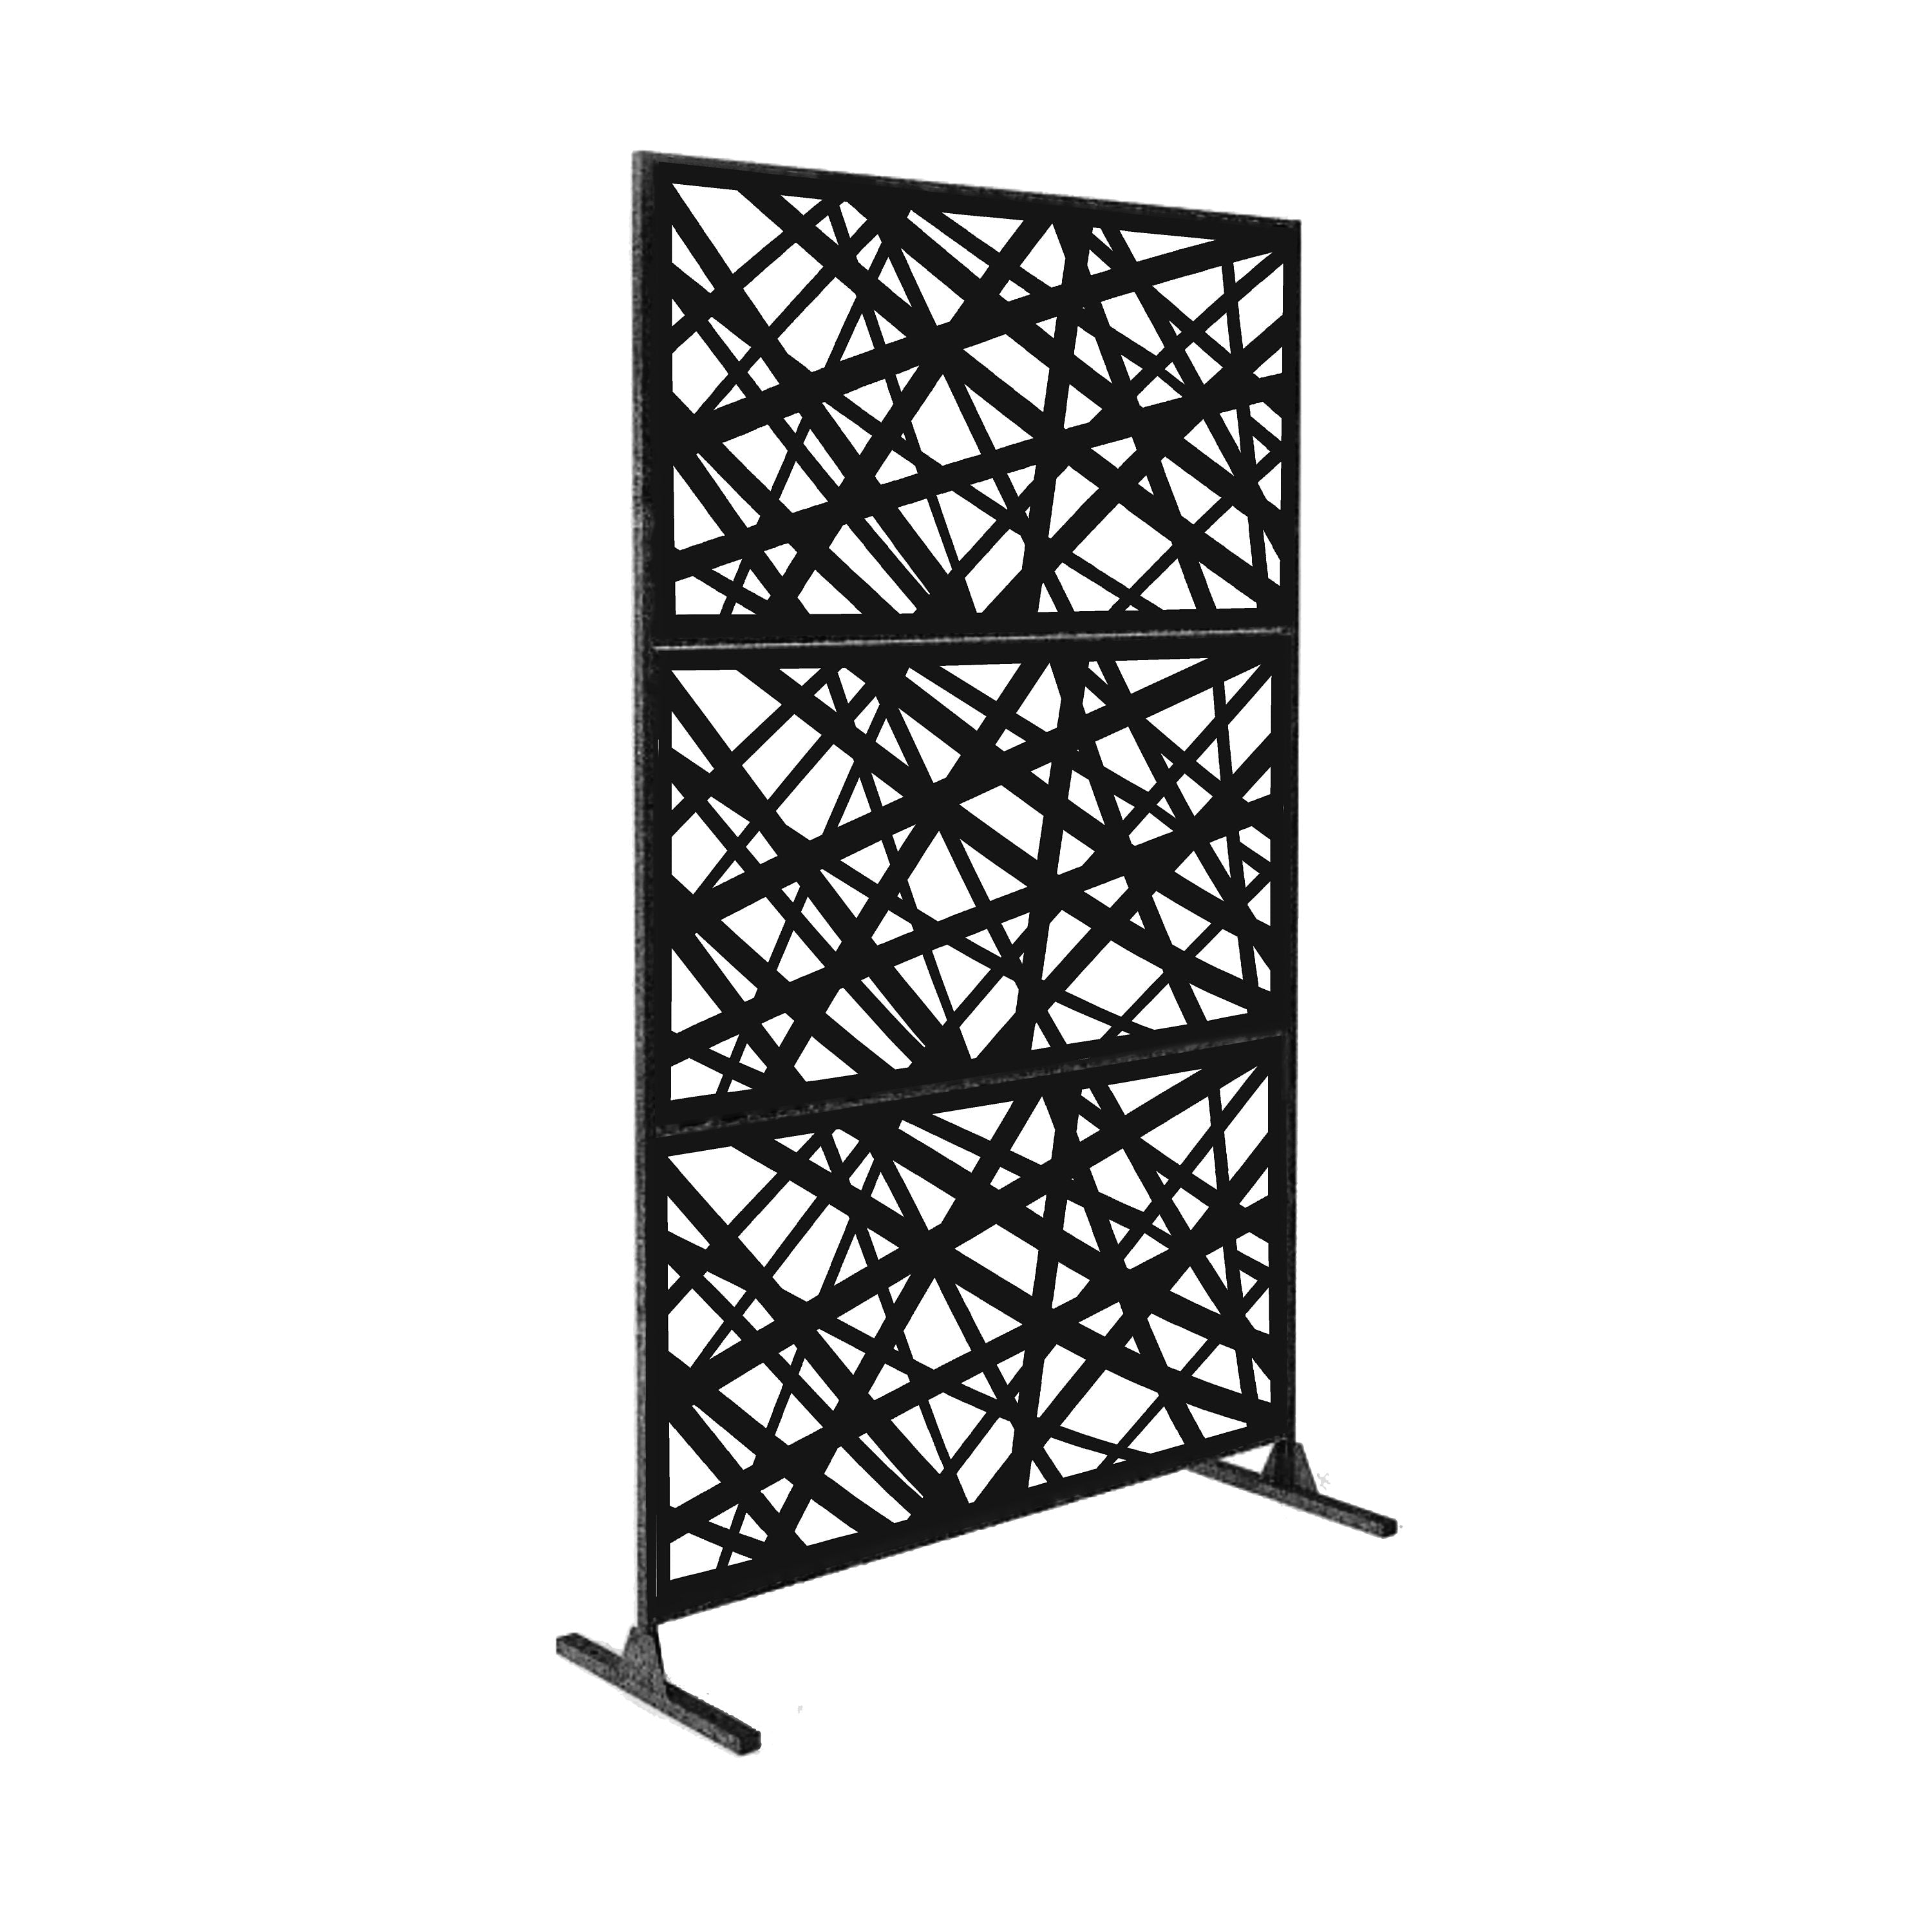 Metal Privacy Screen, Laser Cut Decorative Steel Privacy Panel Metal Fencing, Hanging Room Divider Partitions Panel Screen,48x75inch